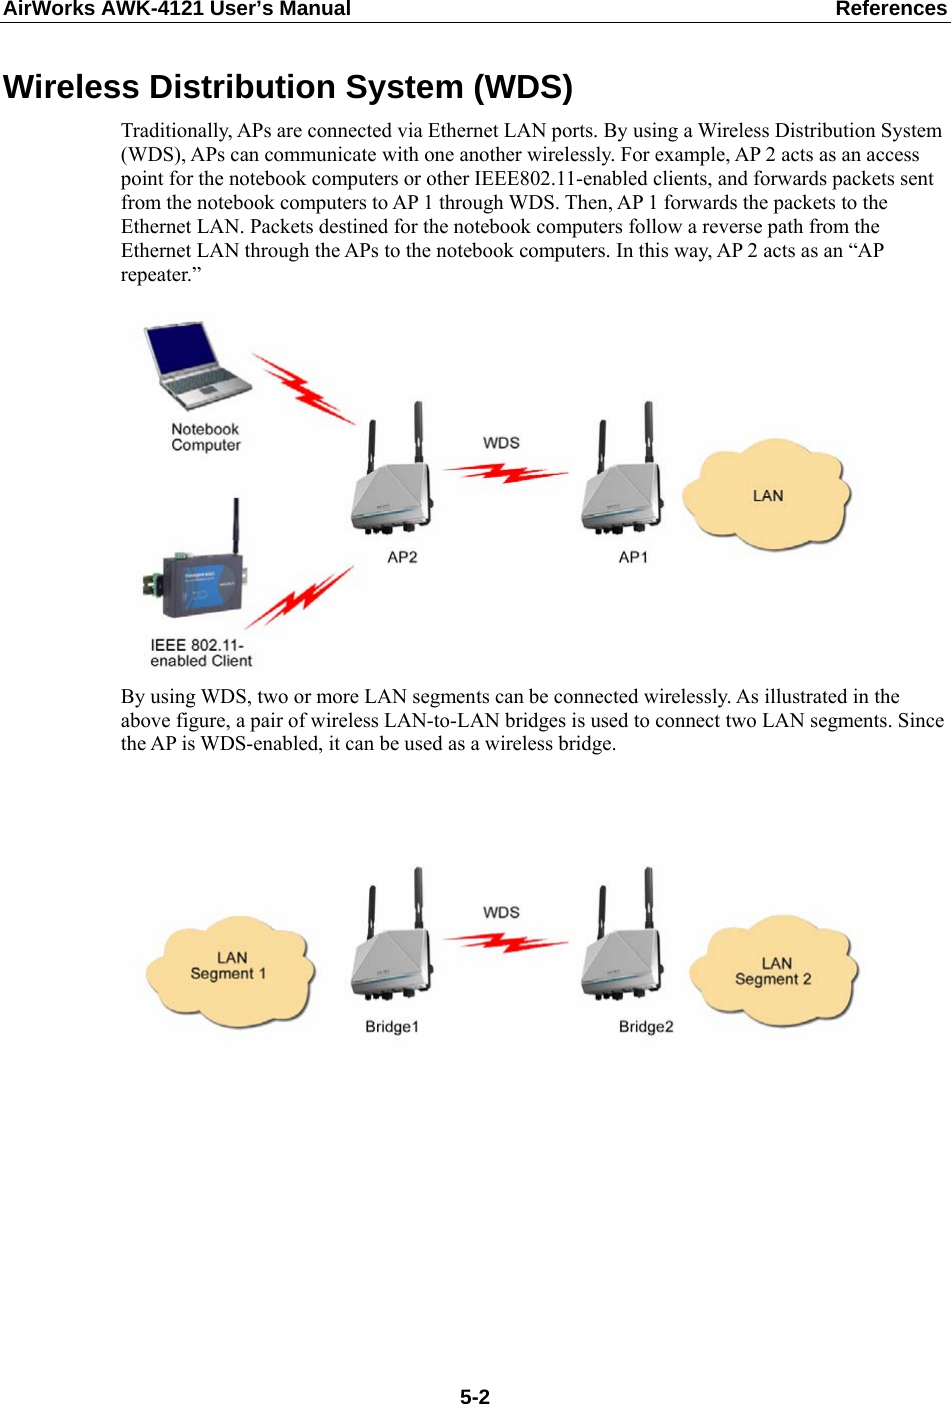 AirWorks AWK-4121 User’s Manual  References Wireless Distribution System (WDS) Traditionally, APs are connected via Ethernet LAN ports. By using a Wireless Distribution System (WDS), APs can communicate with one another wirelessly. For example, AP 2 acts as an access point for the notebook computers or other IEEE802.11-enabled clients, and forwards packets sent from the notebook computers to AP 1 through WDS. Then, AP 1 forwards the packets to the Ethernet LAN. Packets destined for the notebook computers follow a reverse path from the Ethernet LAN through the APs to the notebook computers. In this way, AP 2 acts as an “AP repeater.”  By using WDS, two or more LAN segments can be connected wirelessly. As illustrated in the above figure, a pair of wireless LAN-to-LAN bridges is used to connect two LAN segments. Since the AP is WDS-enabled, it can be used as a wireless bridge.        5-2